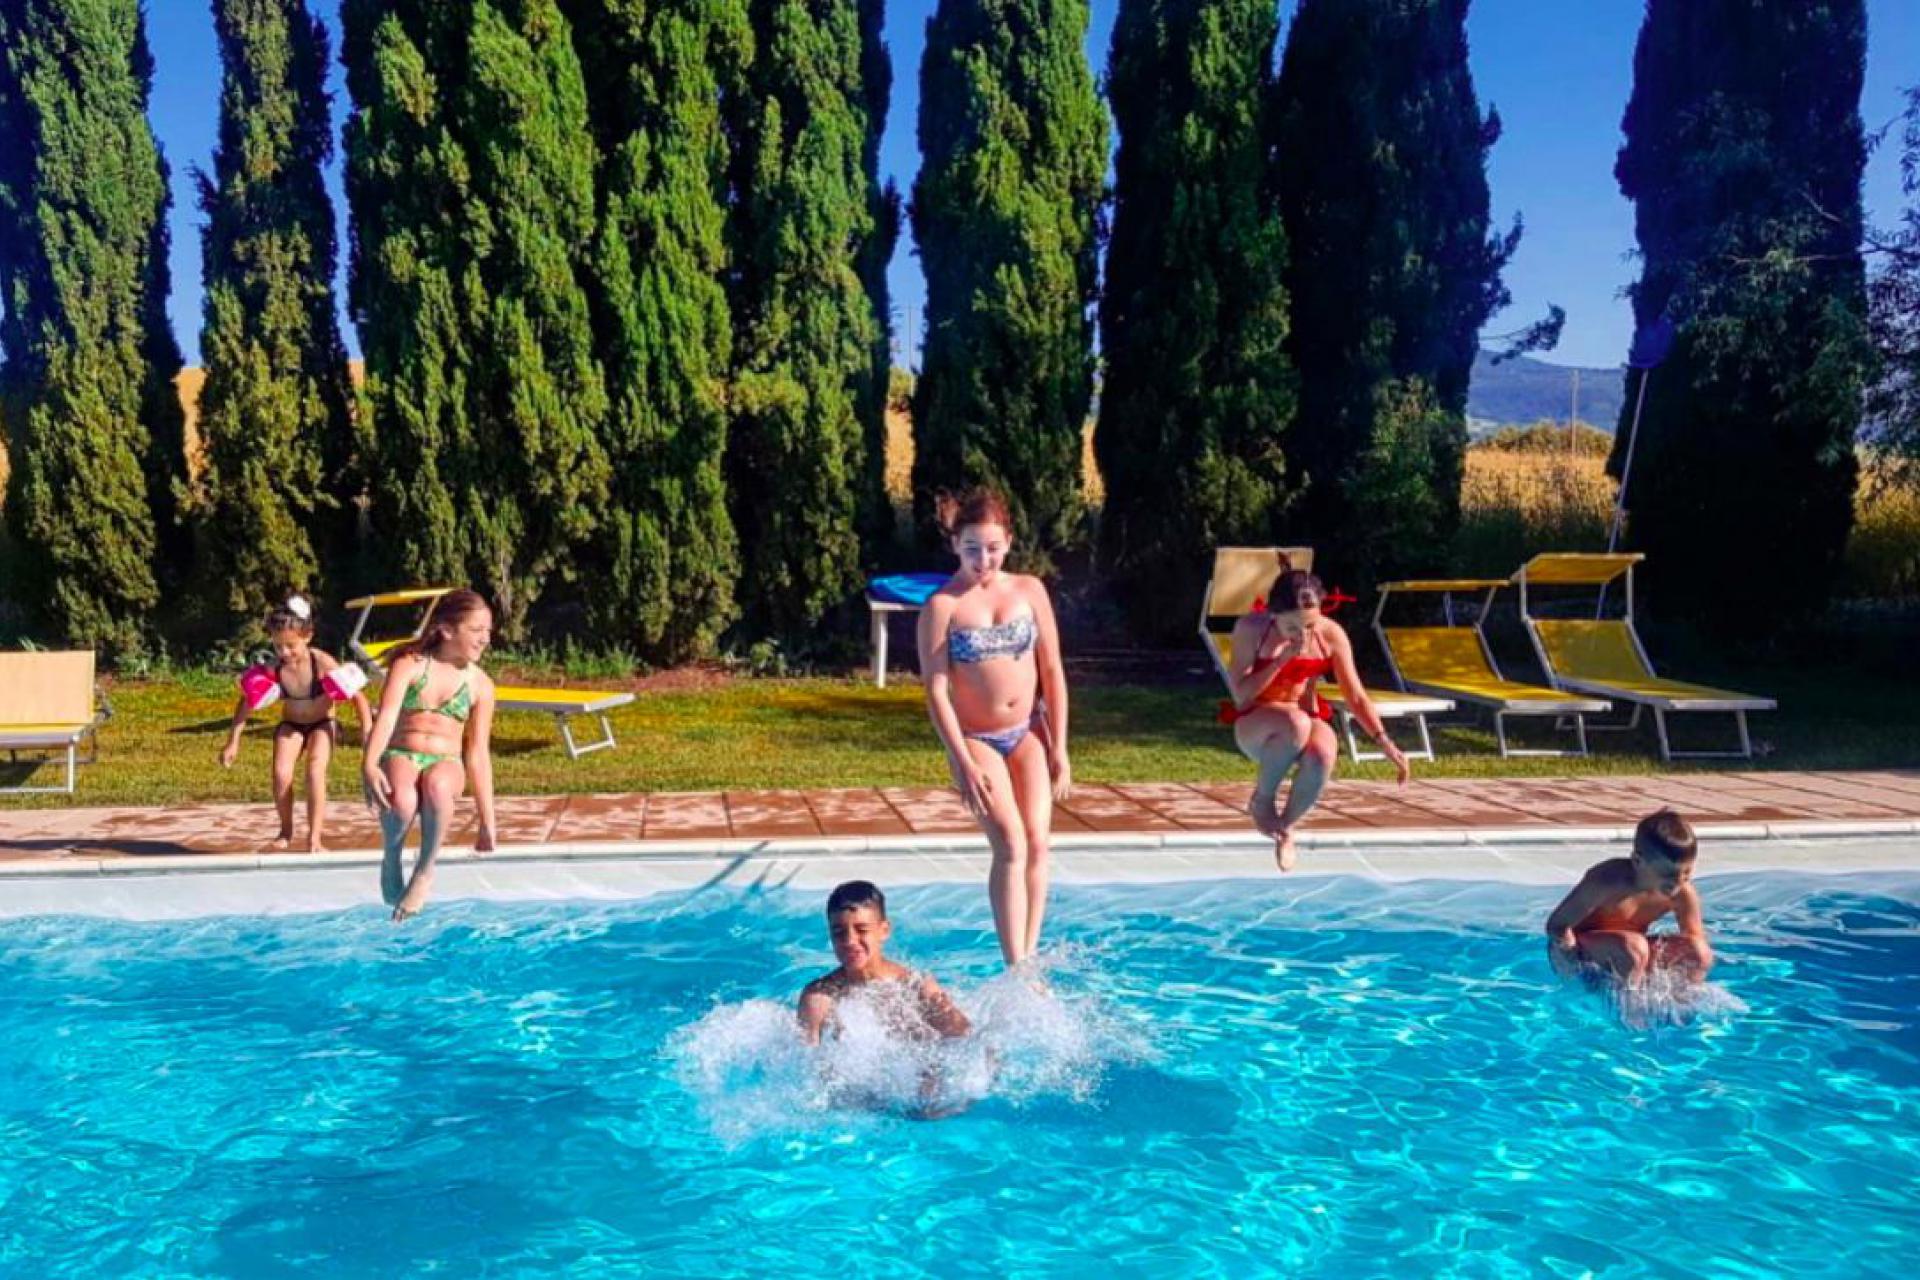 Quietly-situated spacious agriturismo for the whole family